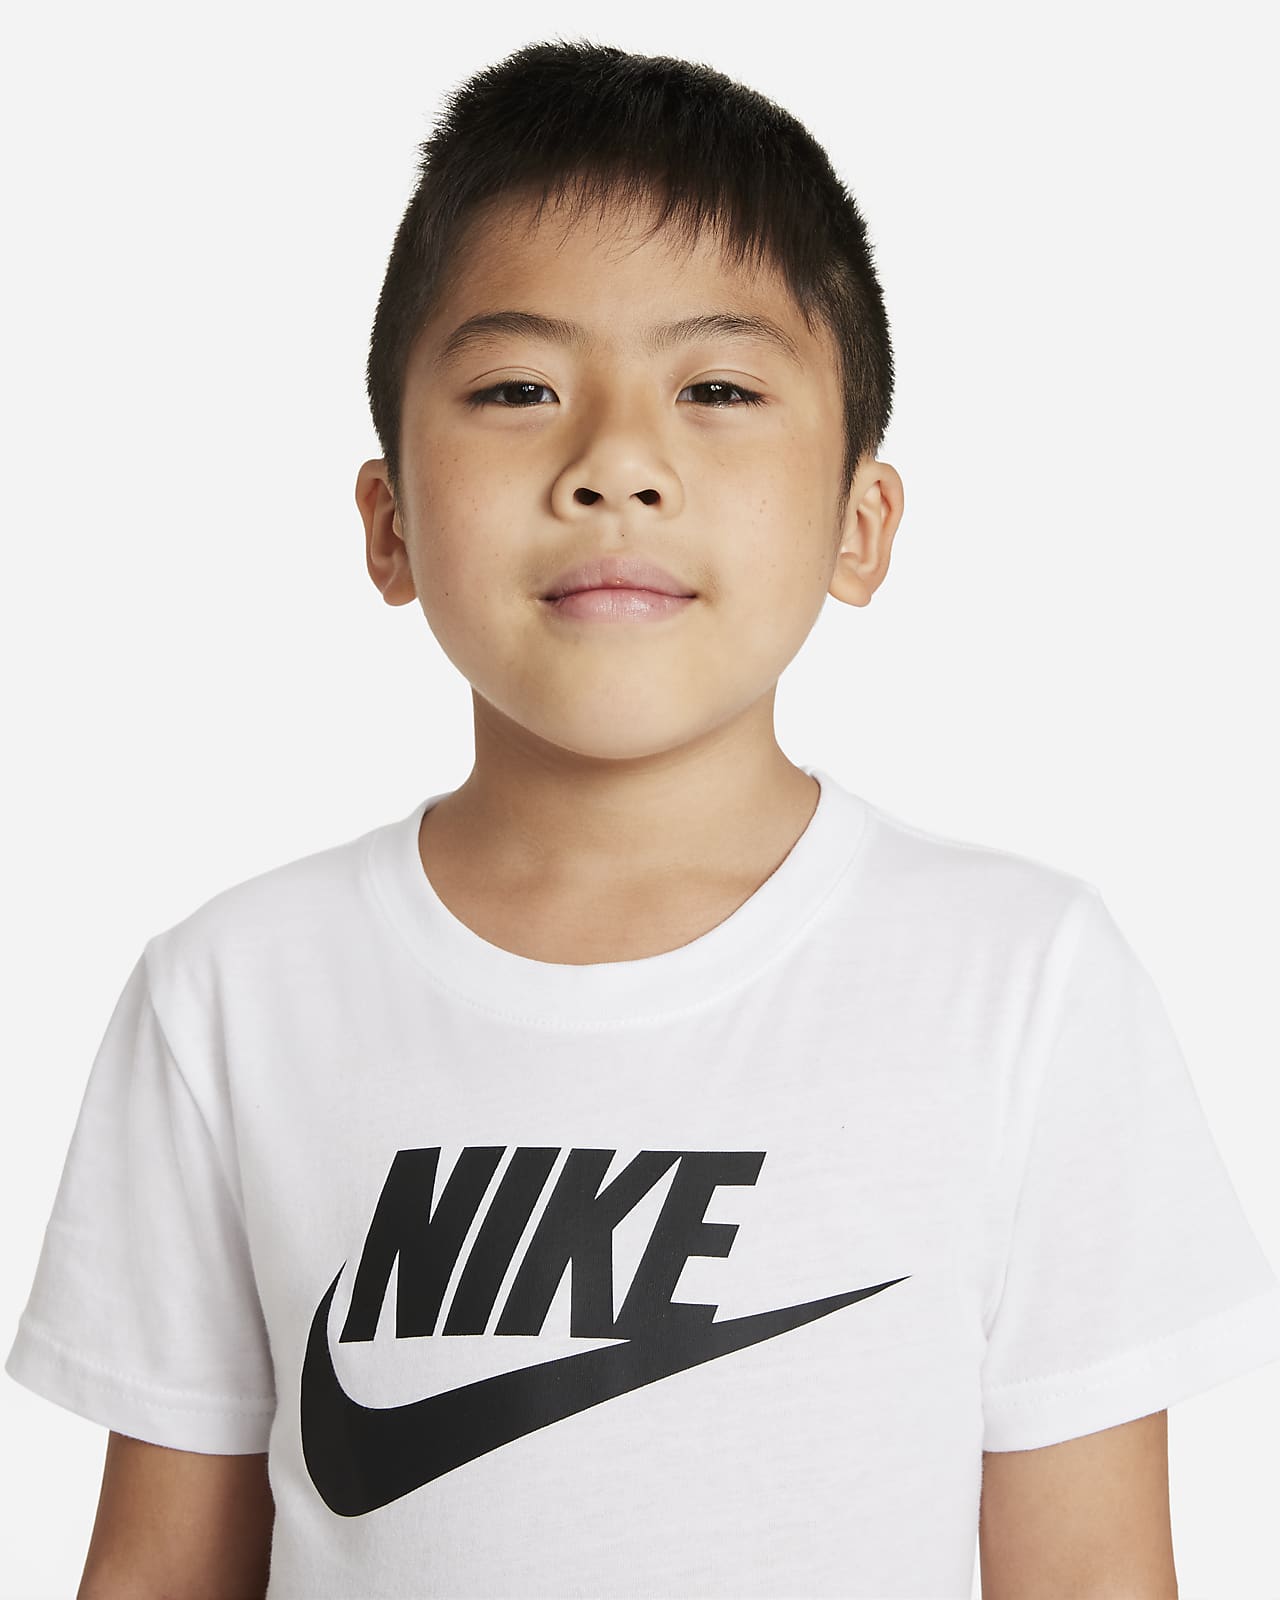 Younger Kids' T-Shirt. Nike IE